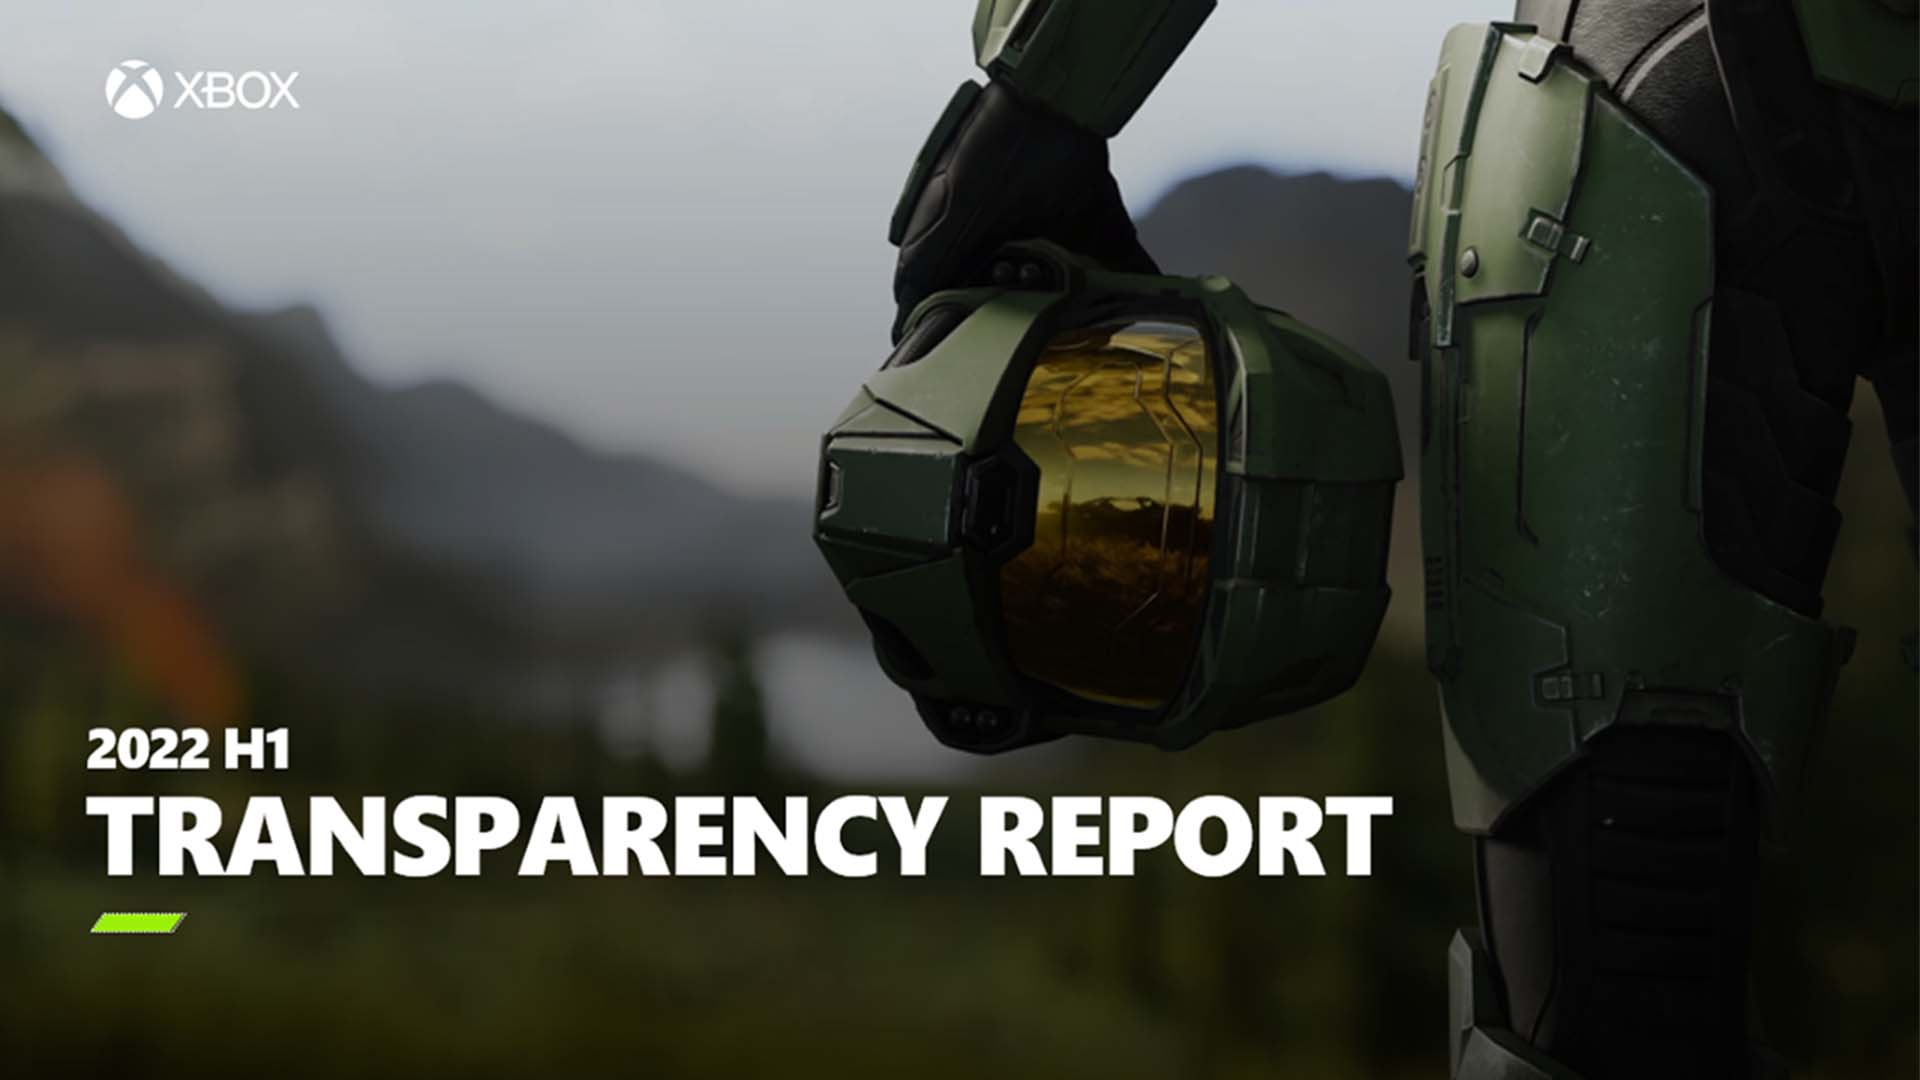 Xbox Shares Community Safety Approach in Transparency Report